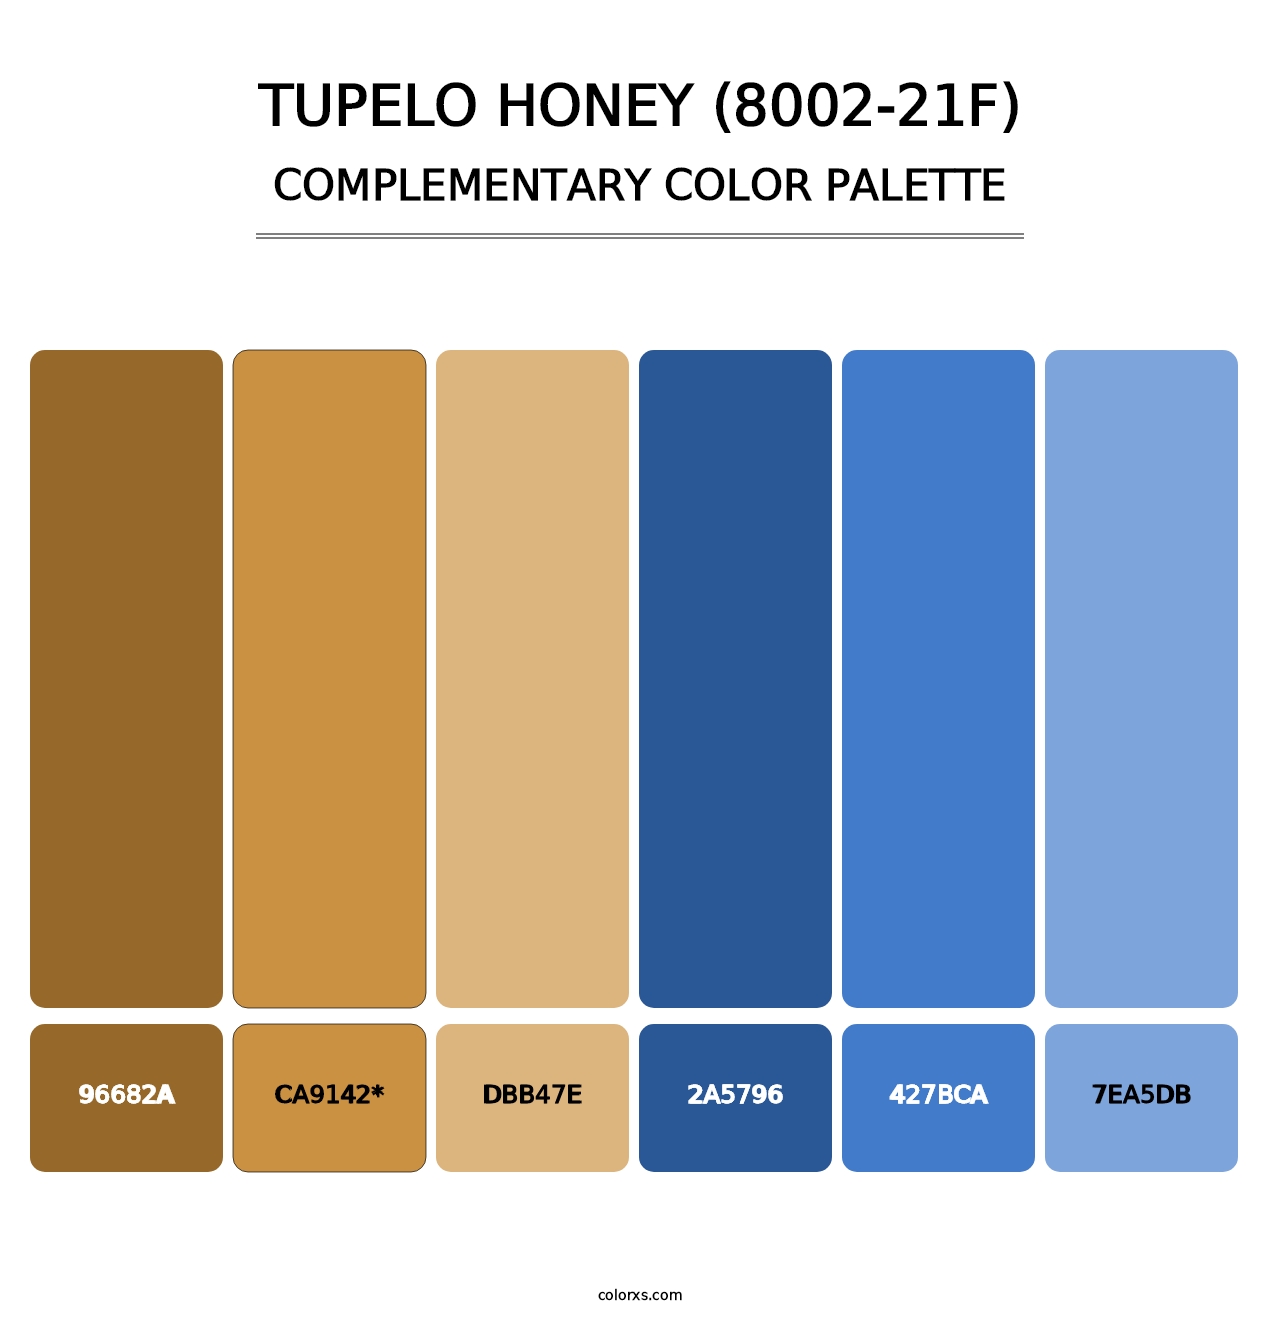 Tupelo Honey (8002-21F) - Complementary Color Palette